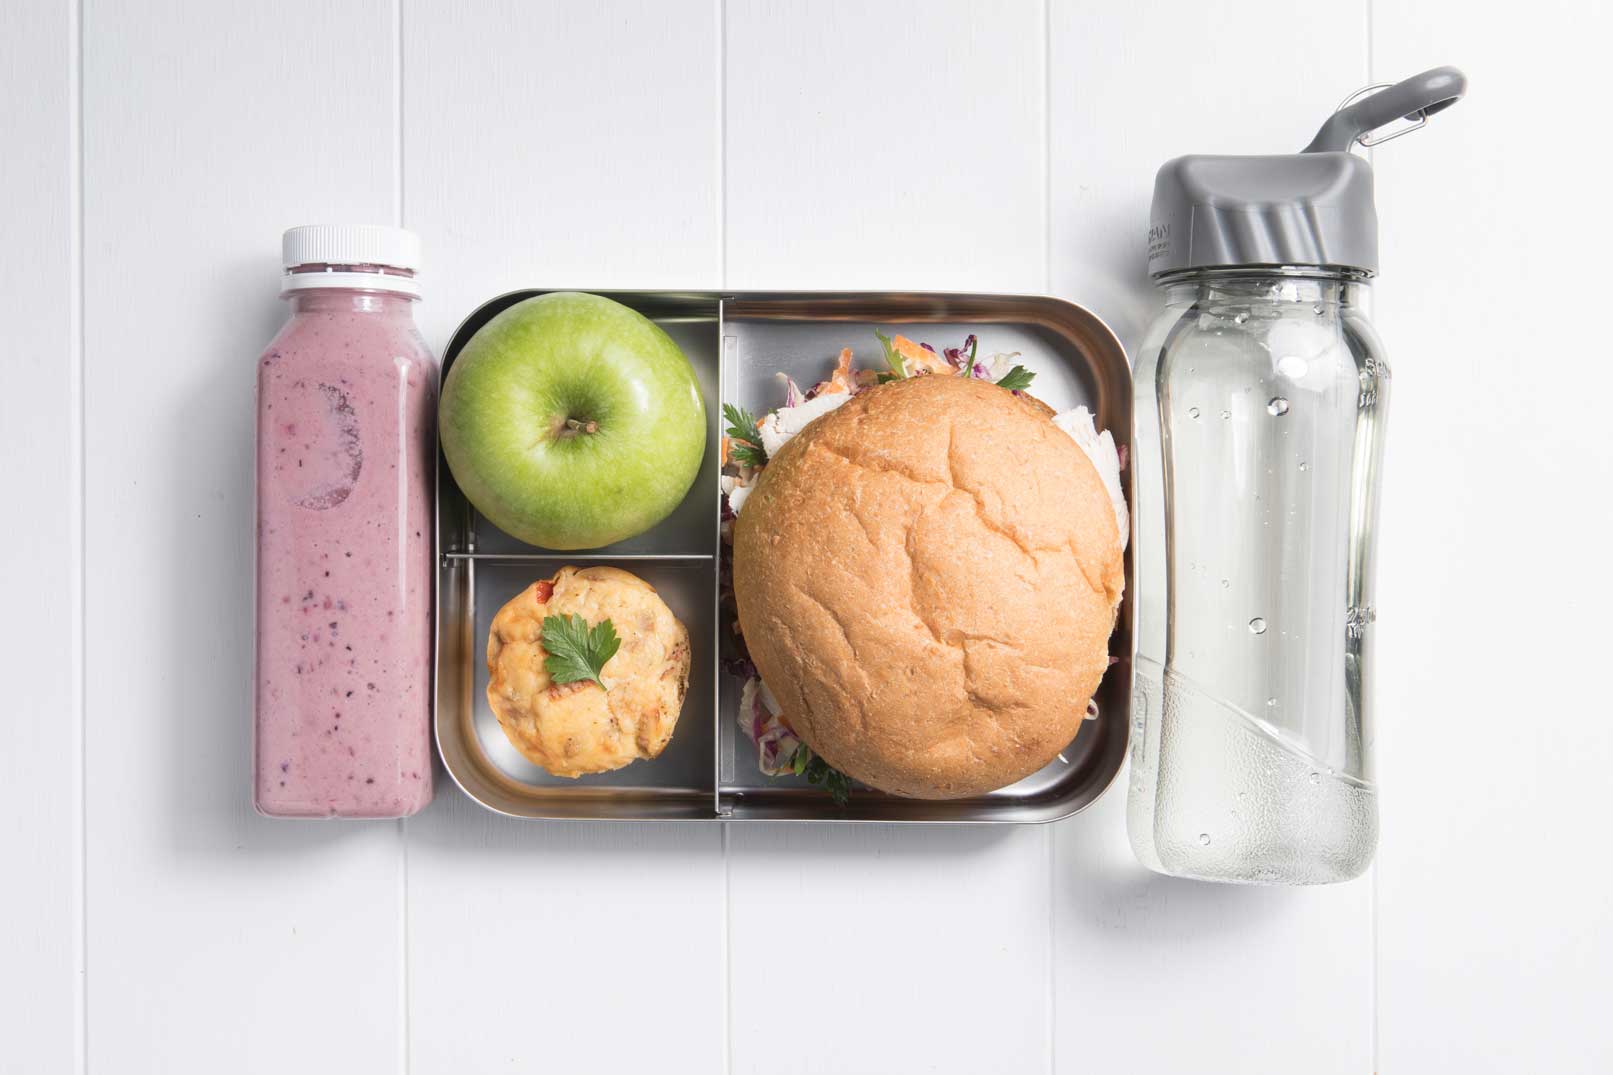 Image of a packed lunch box with chicken and coleslaw roll, easy savoury muffin, green apple and berrylicious smoothie and bottle of water on the side